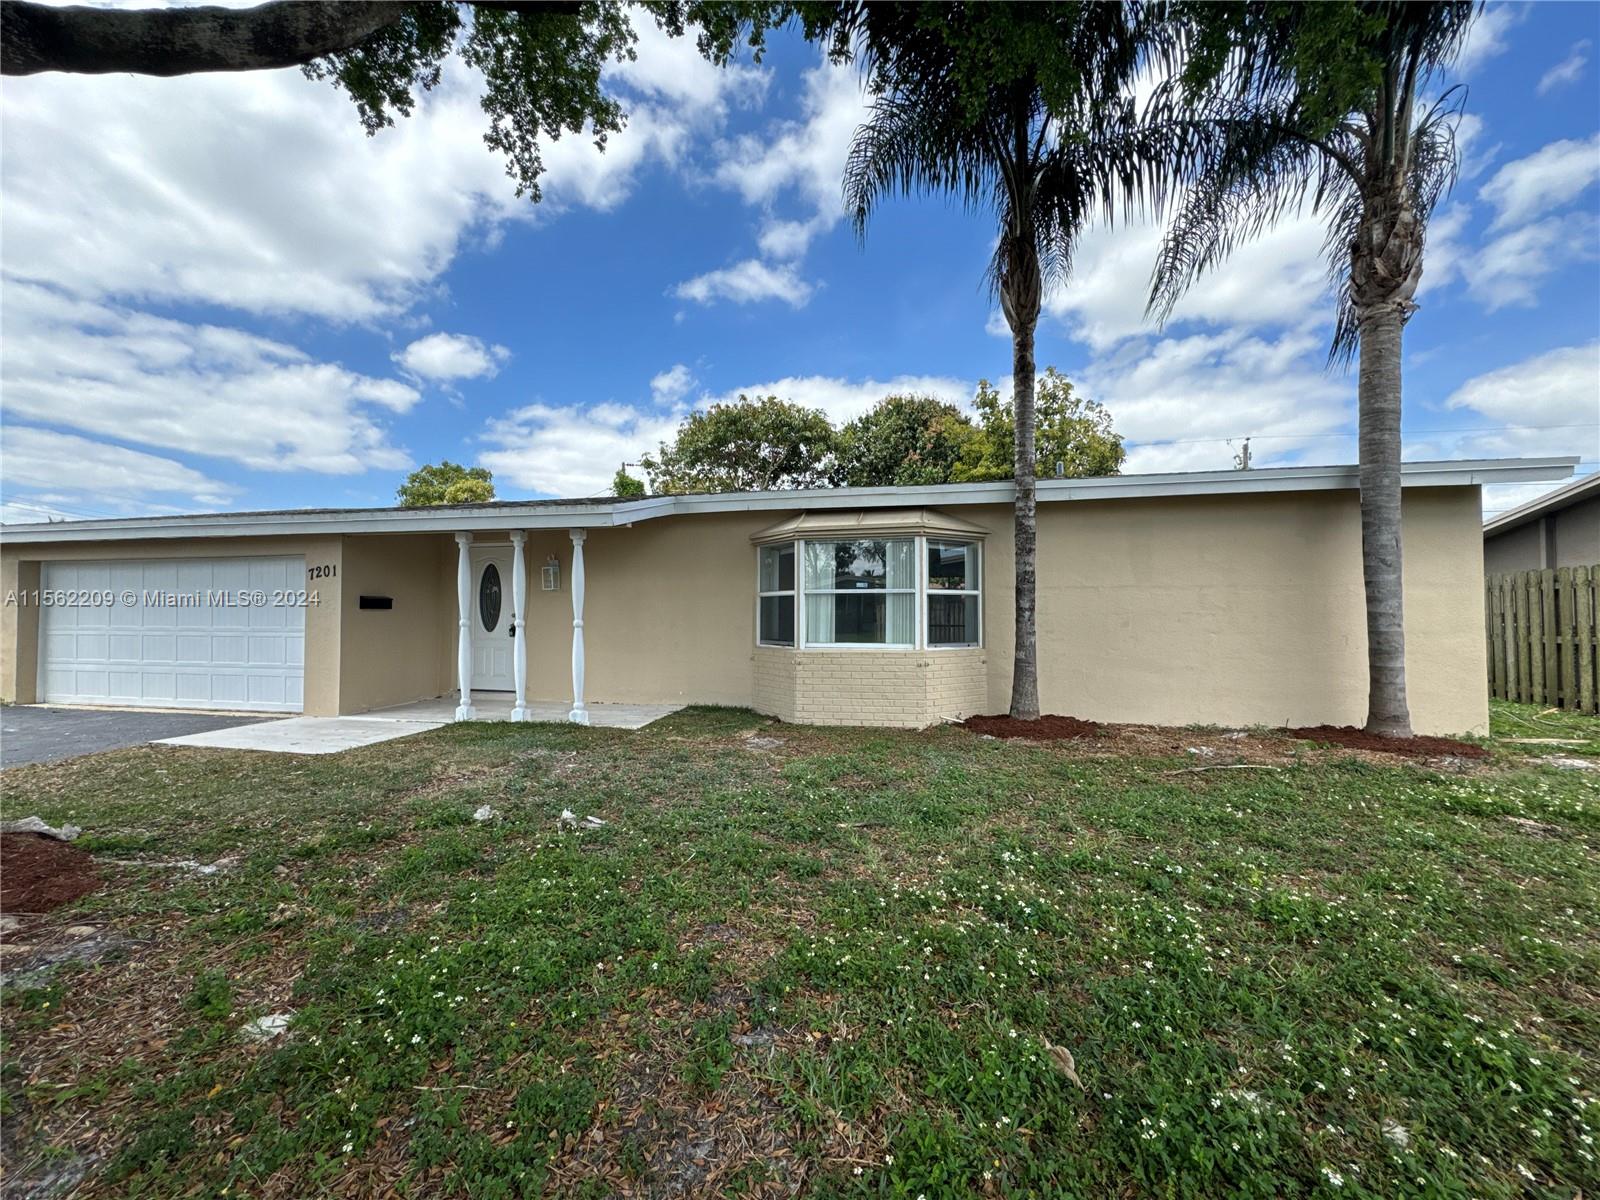 7201 Nw 21st St St, Sunrise, Miami-Dade County, Florida - 4 Bedrooms  
2 Bathrooms - 